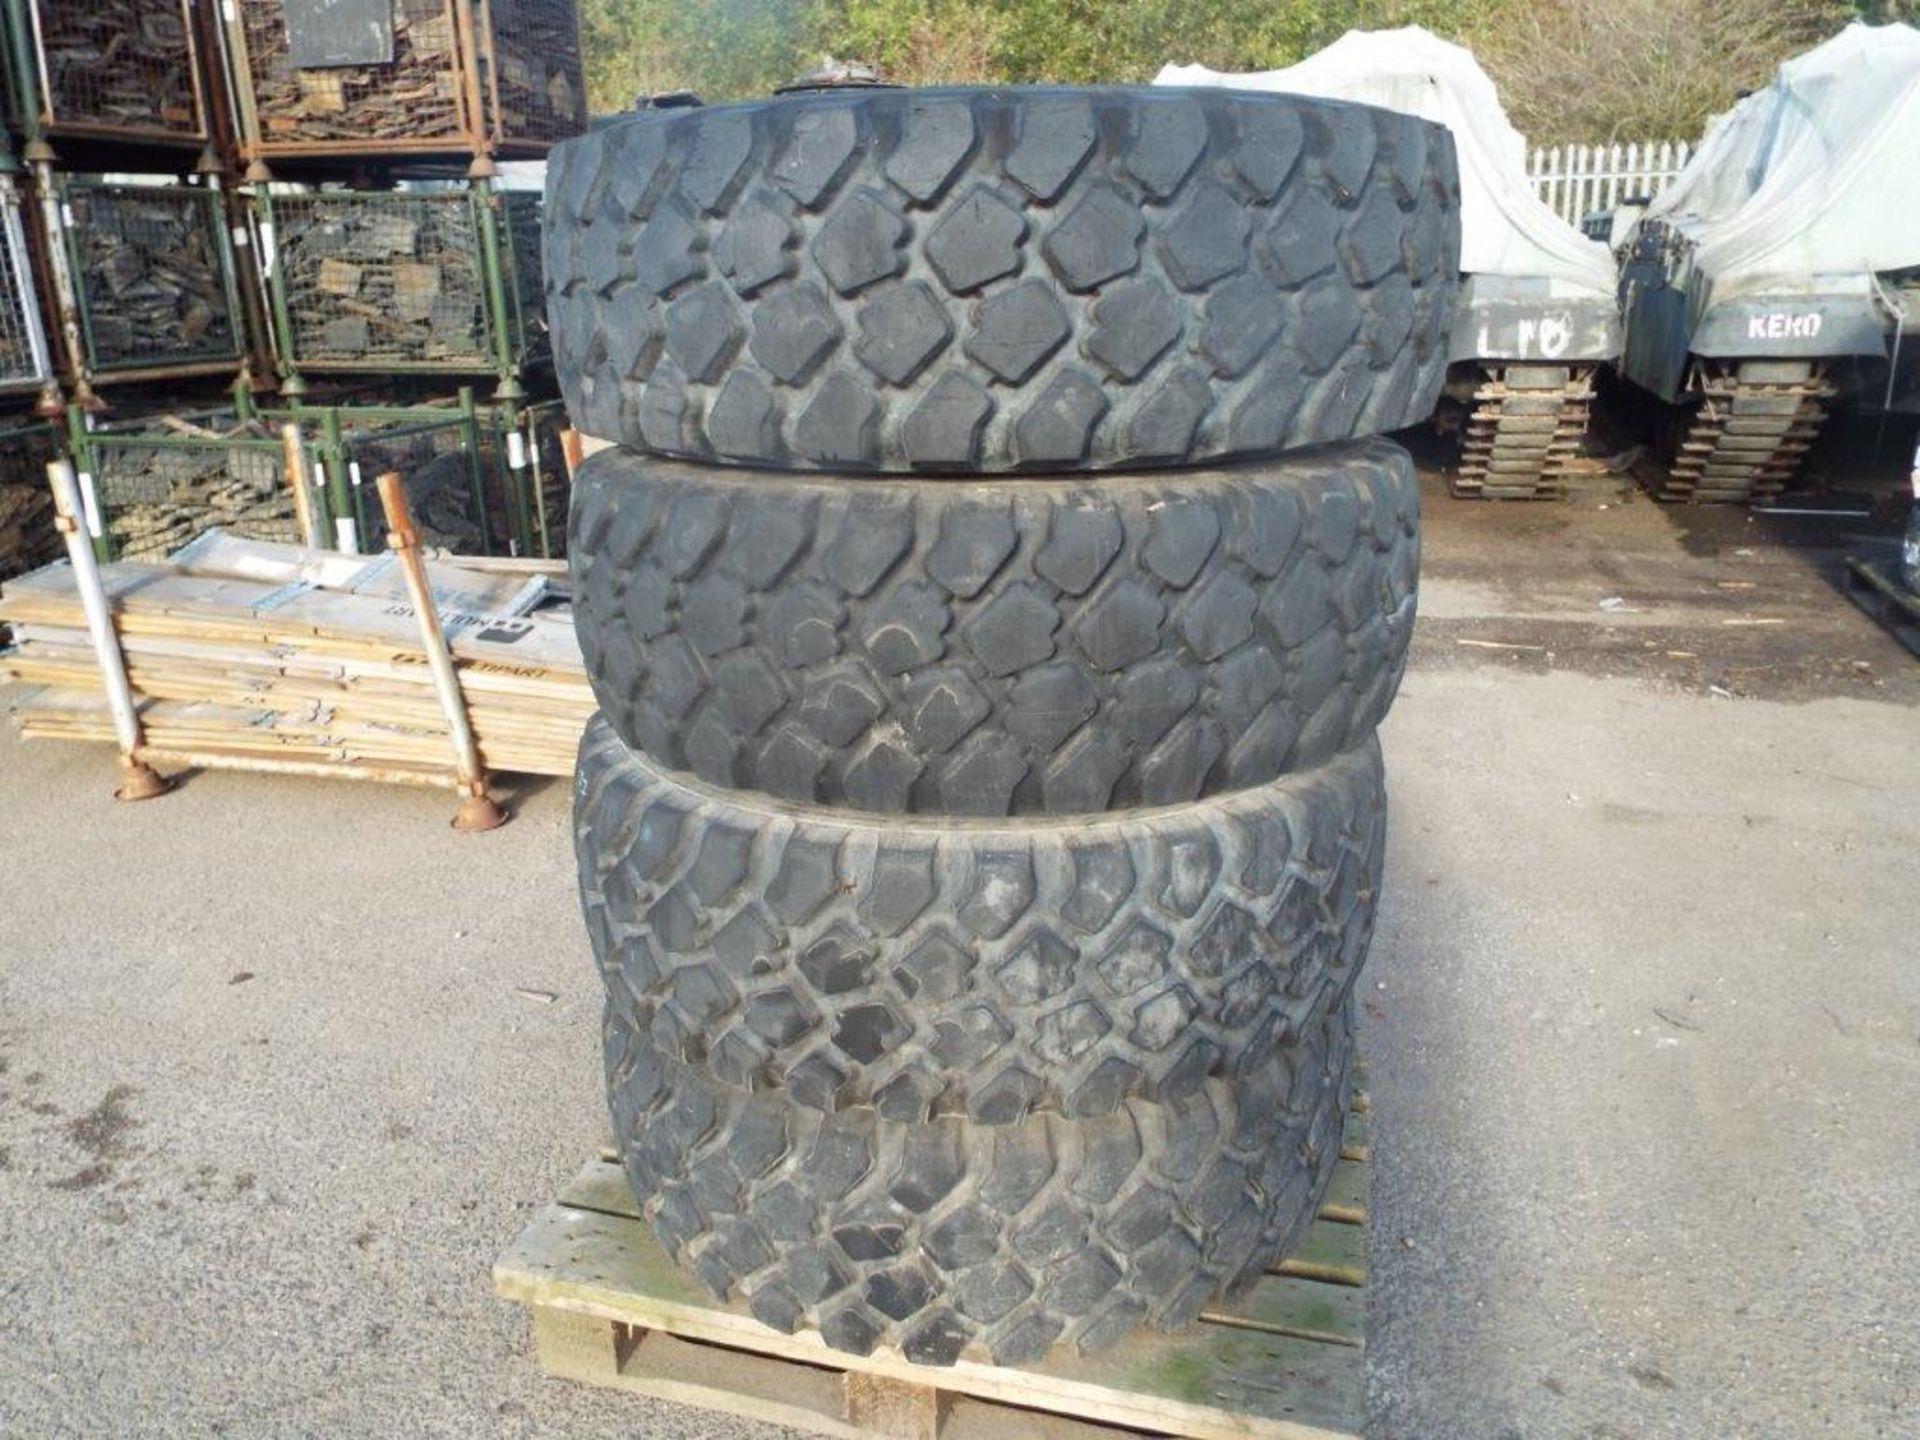 4 x Michelin XZL 395/85 R20 Tyres with 12 Stud Rims